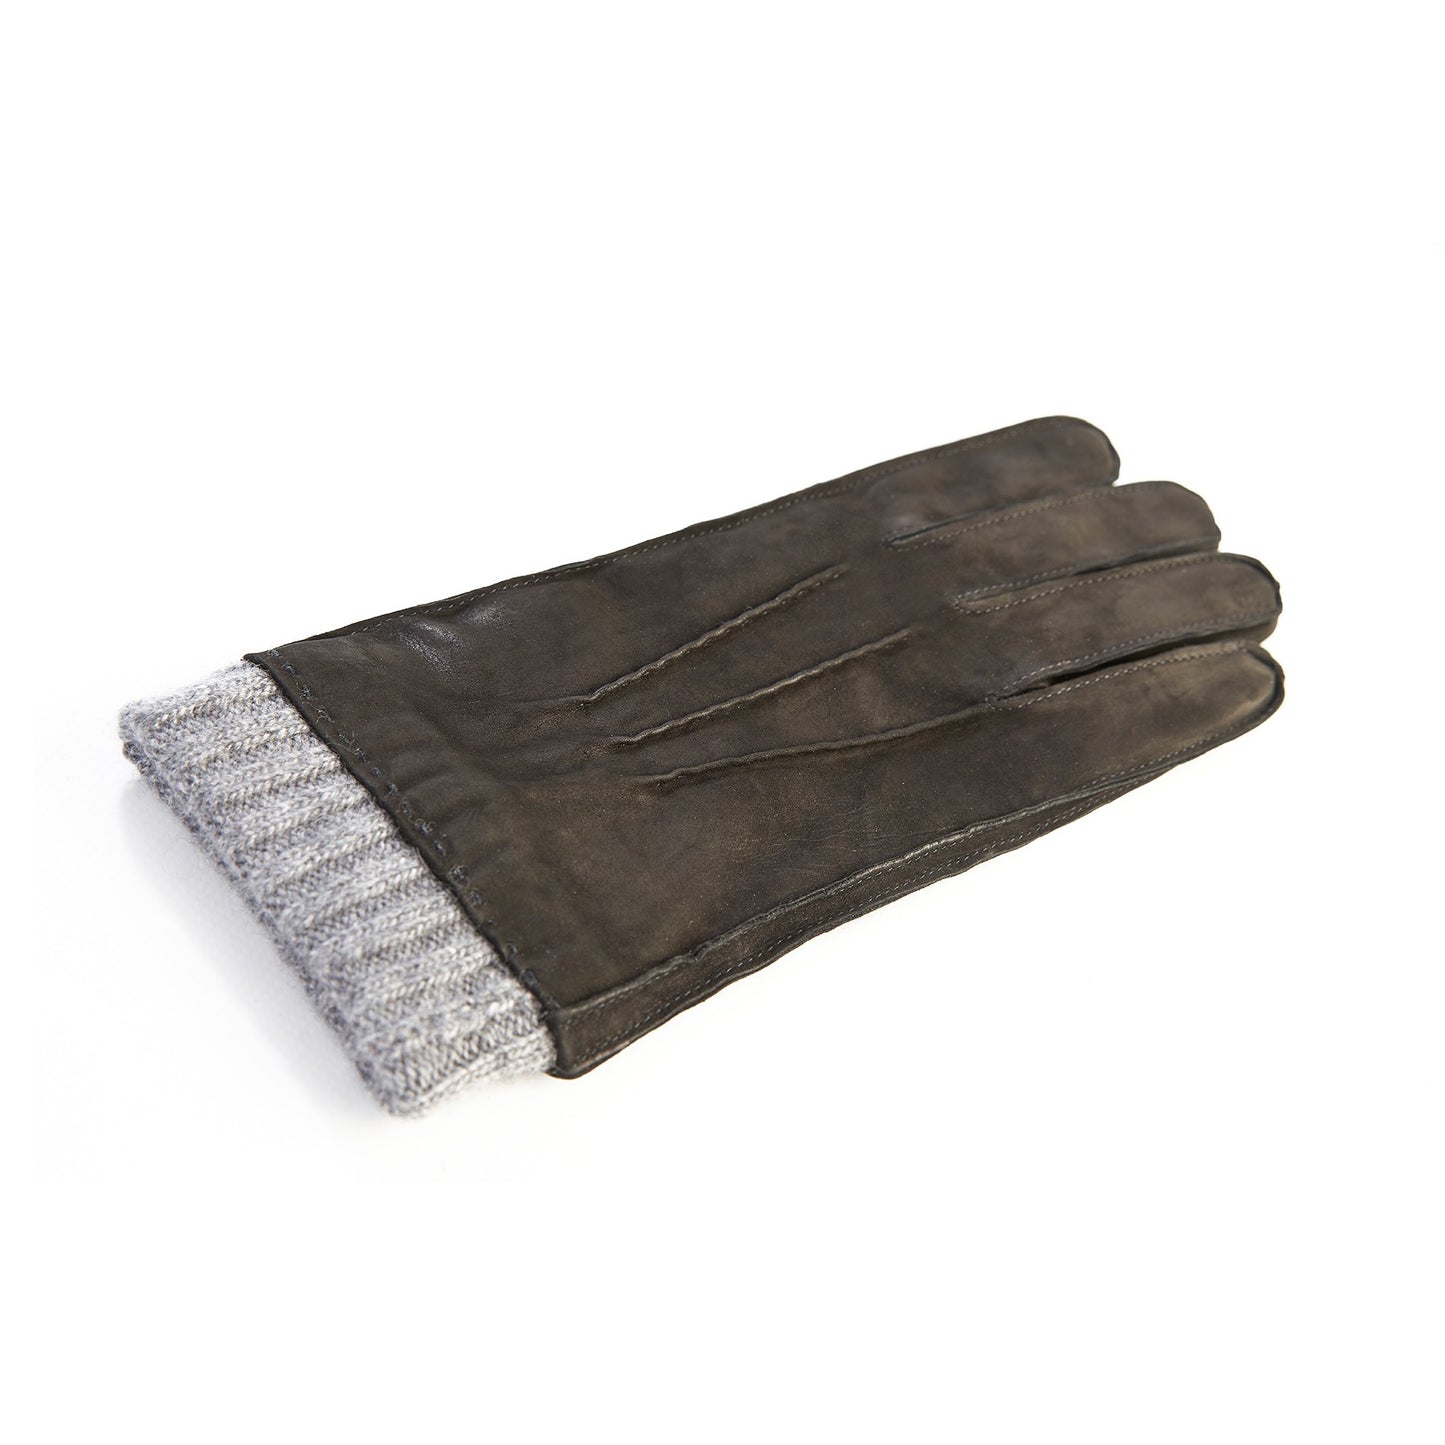 Men's black nubuk gloves with light grey cashmere lining with cuff